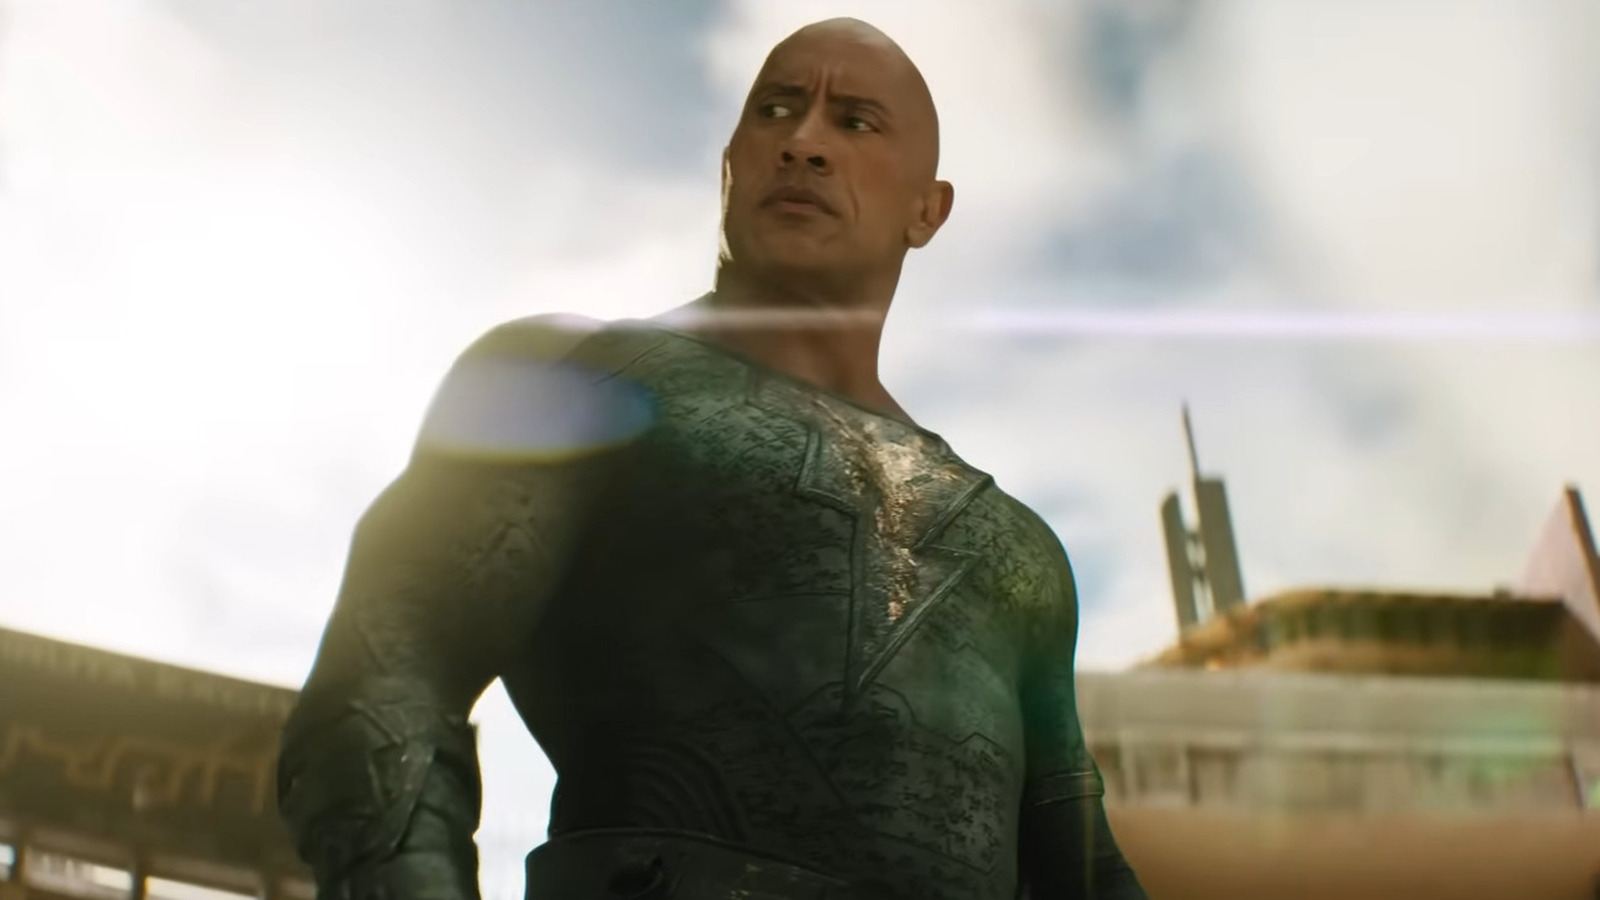 Black Adam vs Superman Is Going To Be Much More Than Just 'One Fight'  Situation, Confirms Producer: Fans Want To Feel A Journey Between These  Guys